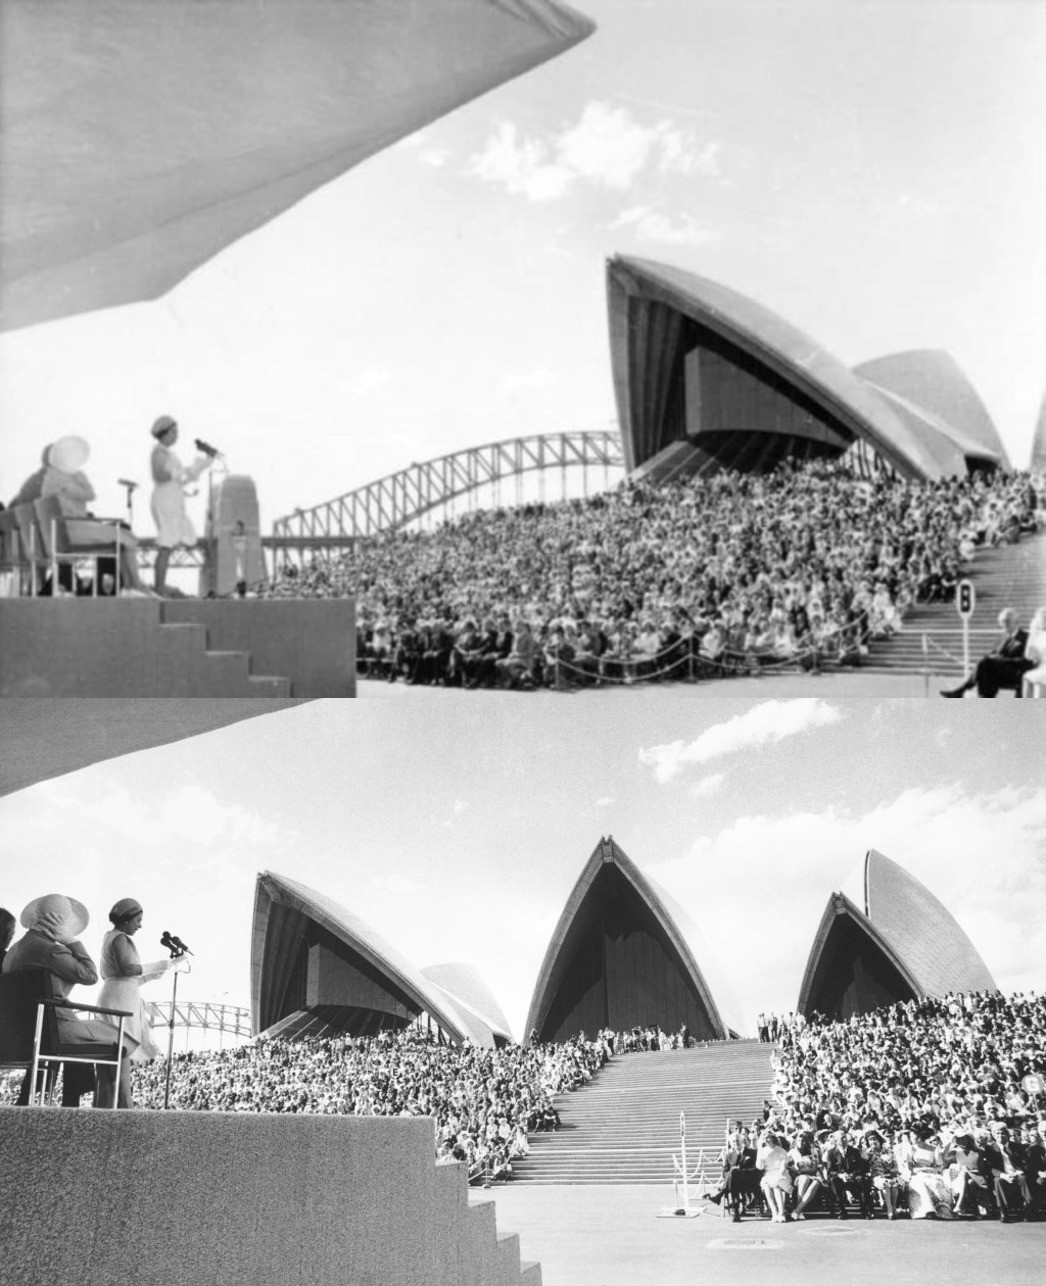 The opening of the Sydney Opera House by Queen Elizabeth 11 on 20 October, was telecast to overseas viewers by OTC satellite circuits. 